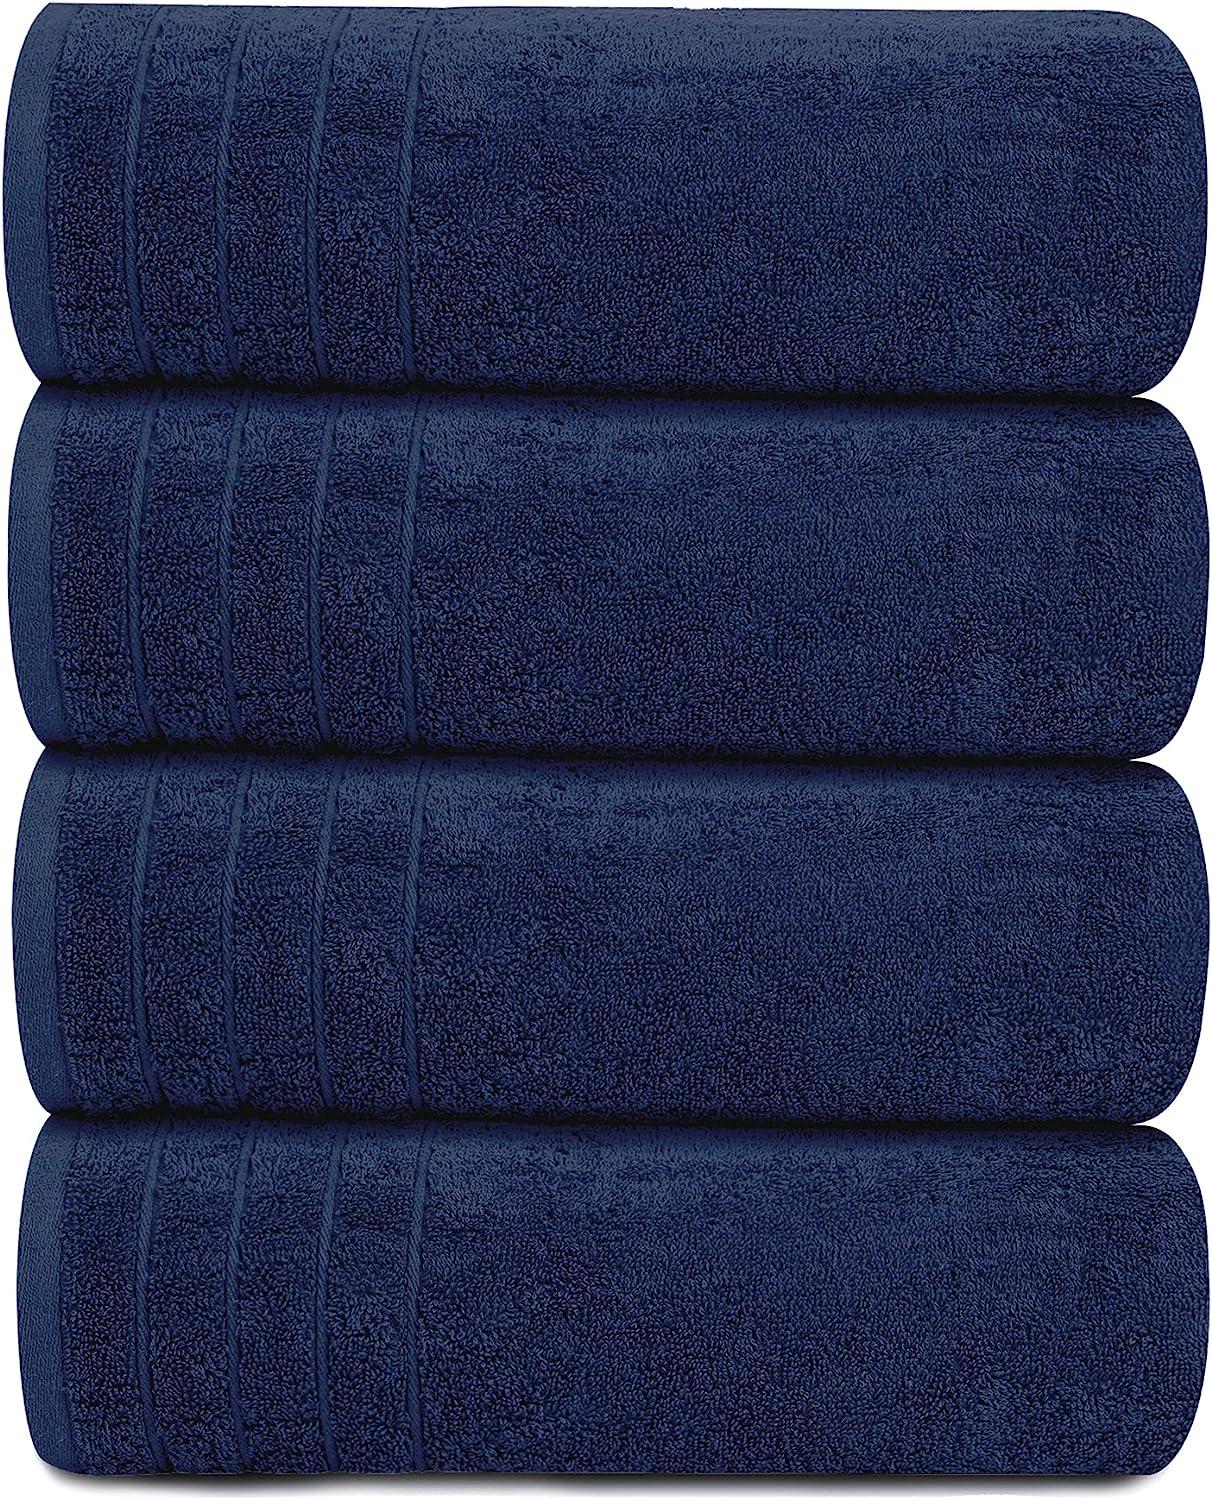 Tens Towels Large Bath Towels, 100% Cotton Towels, 30 x 60 Inches, Extra  Large Bath Towels, Lighter Weight & Super Absorbent, Quick Dry, Perfect  Bathroom Towels for Daily Use 4PK BATH TOWELS SET White